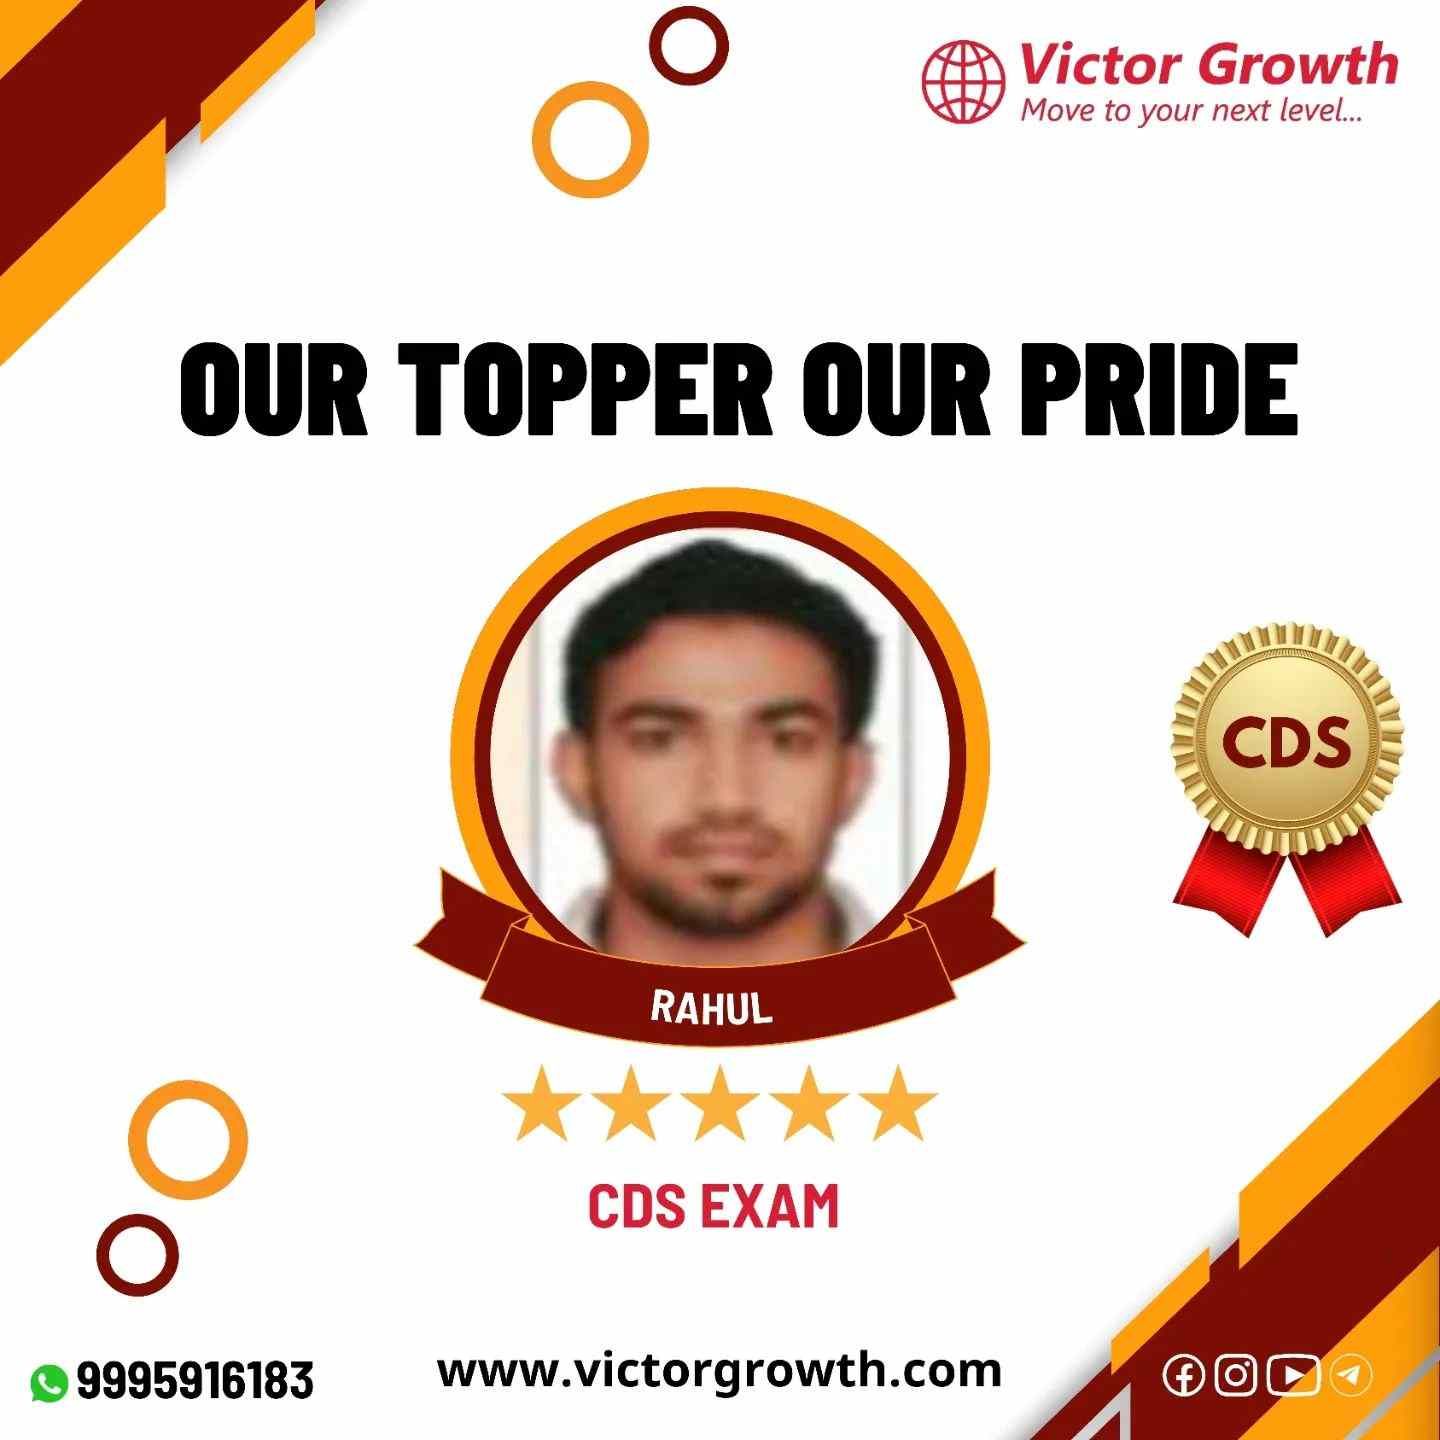 Victor Growth IAS Academy Kochi Topper Student 3 Photo